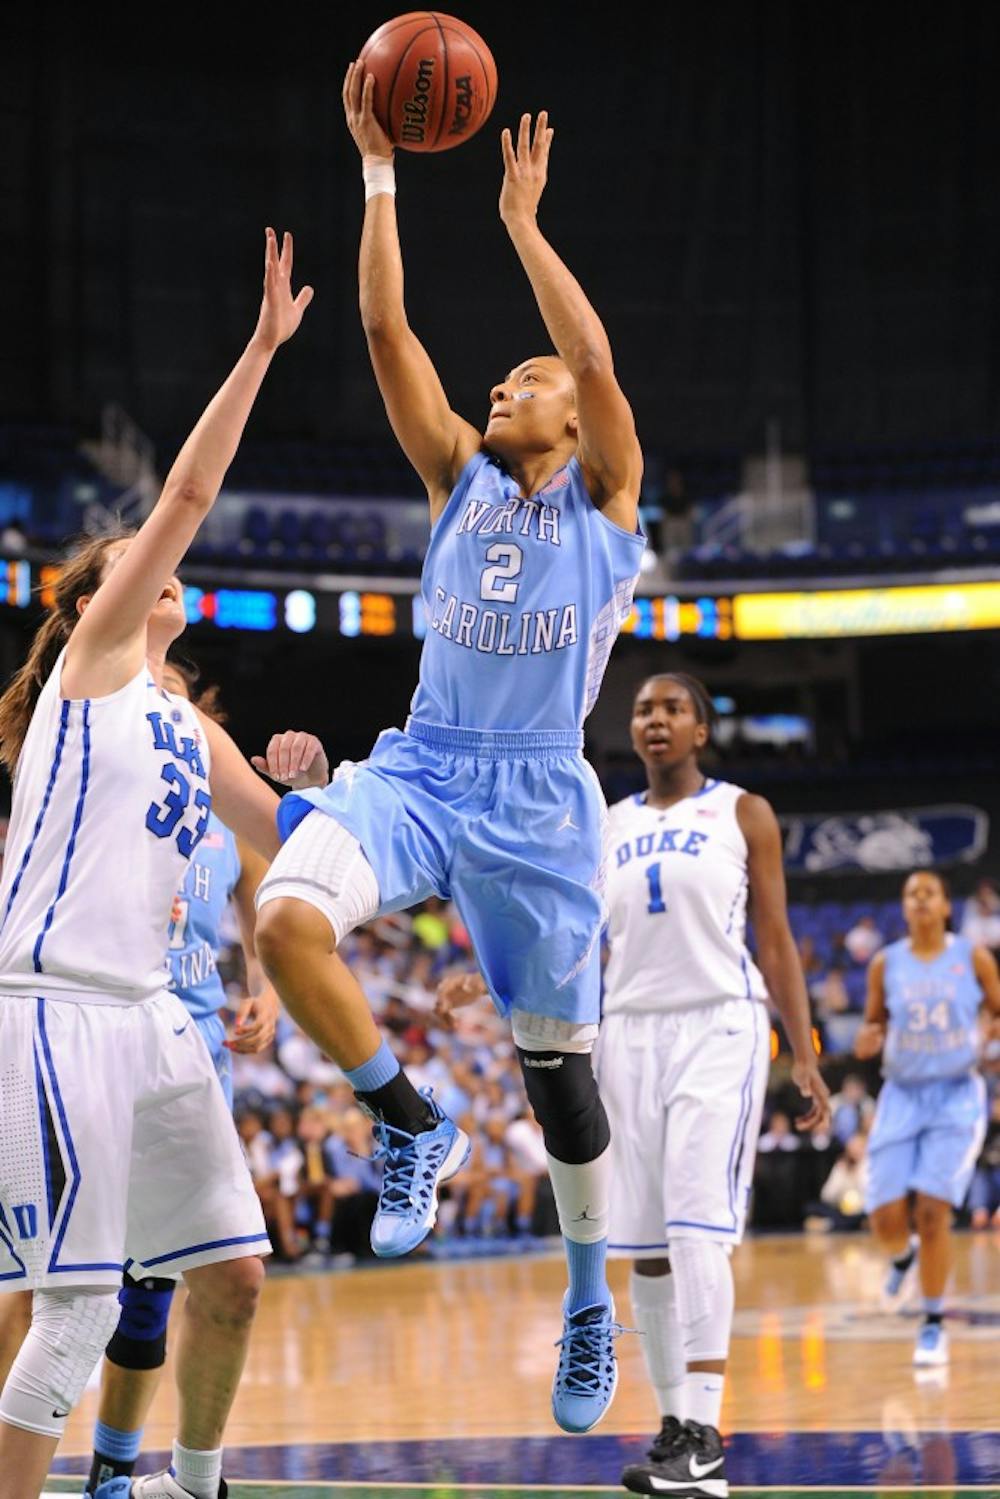 Latifah Coleman (2) of the North Carolina Tar Heels takes a shot over Haley peters (33) of the Duke Blue Devils